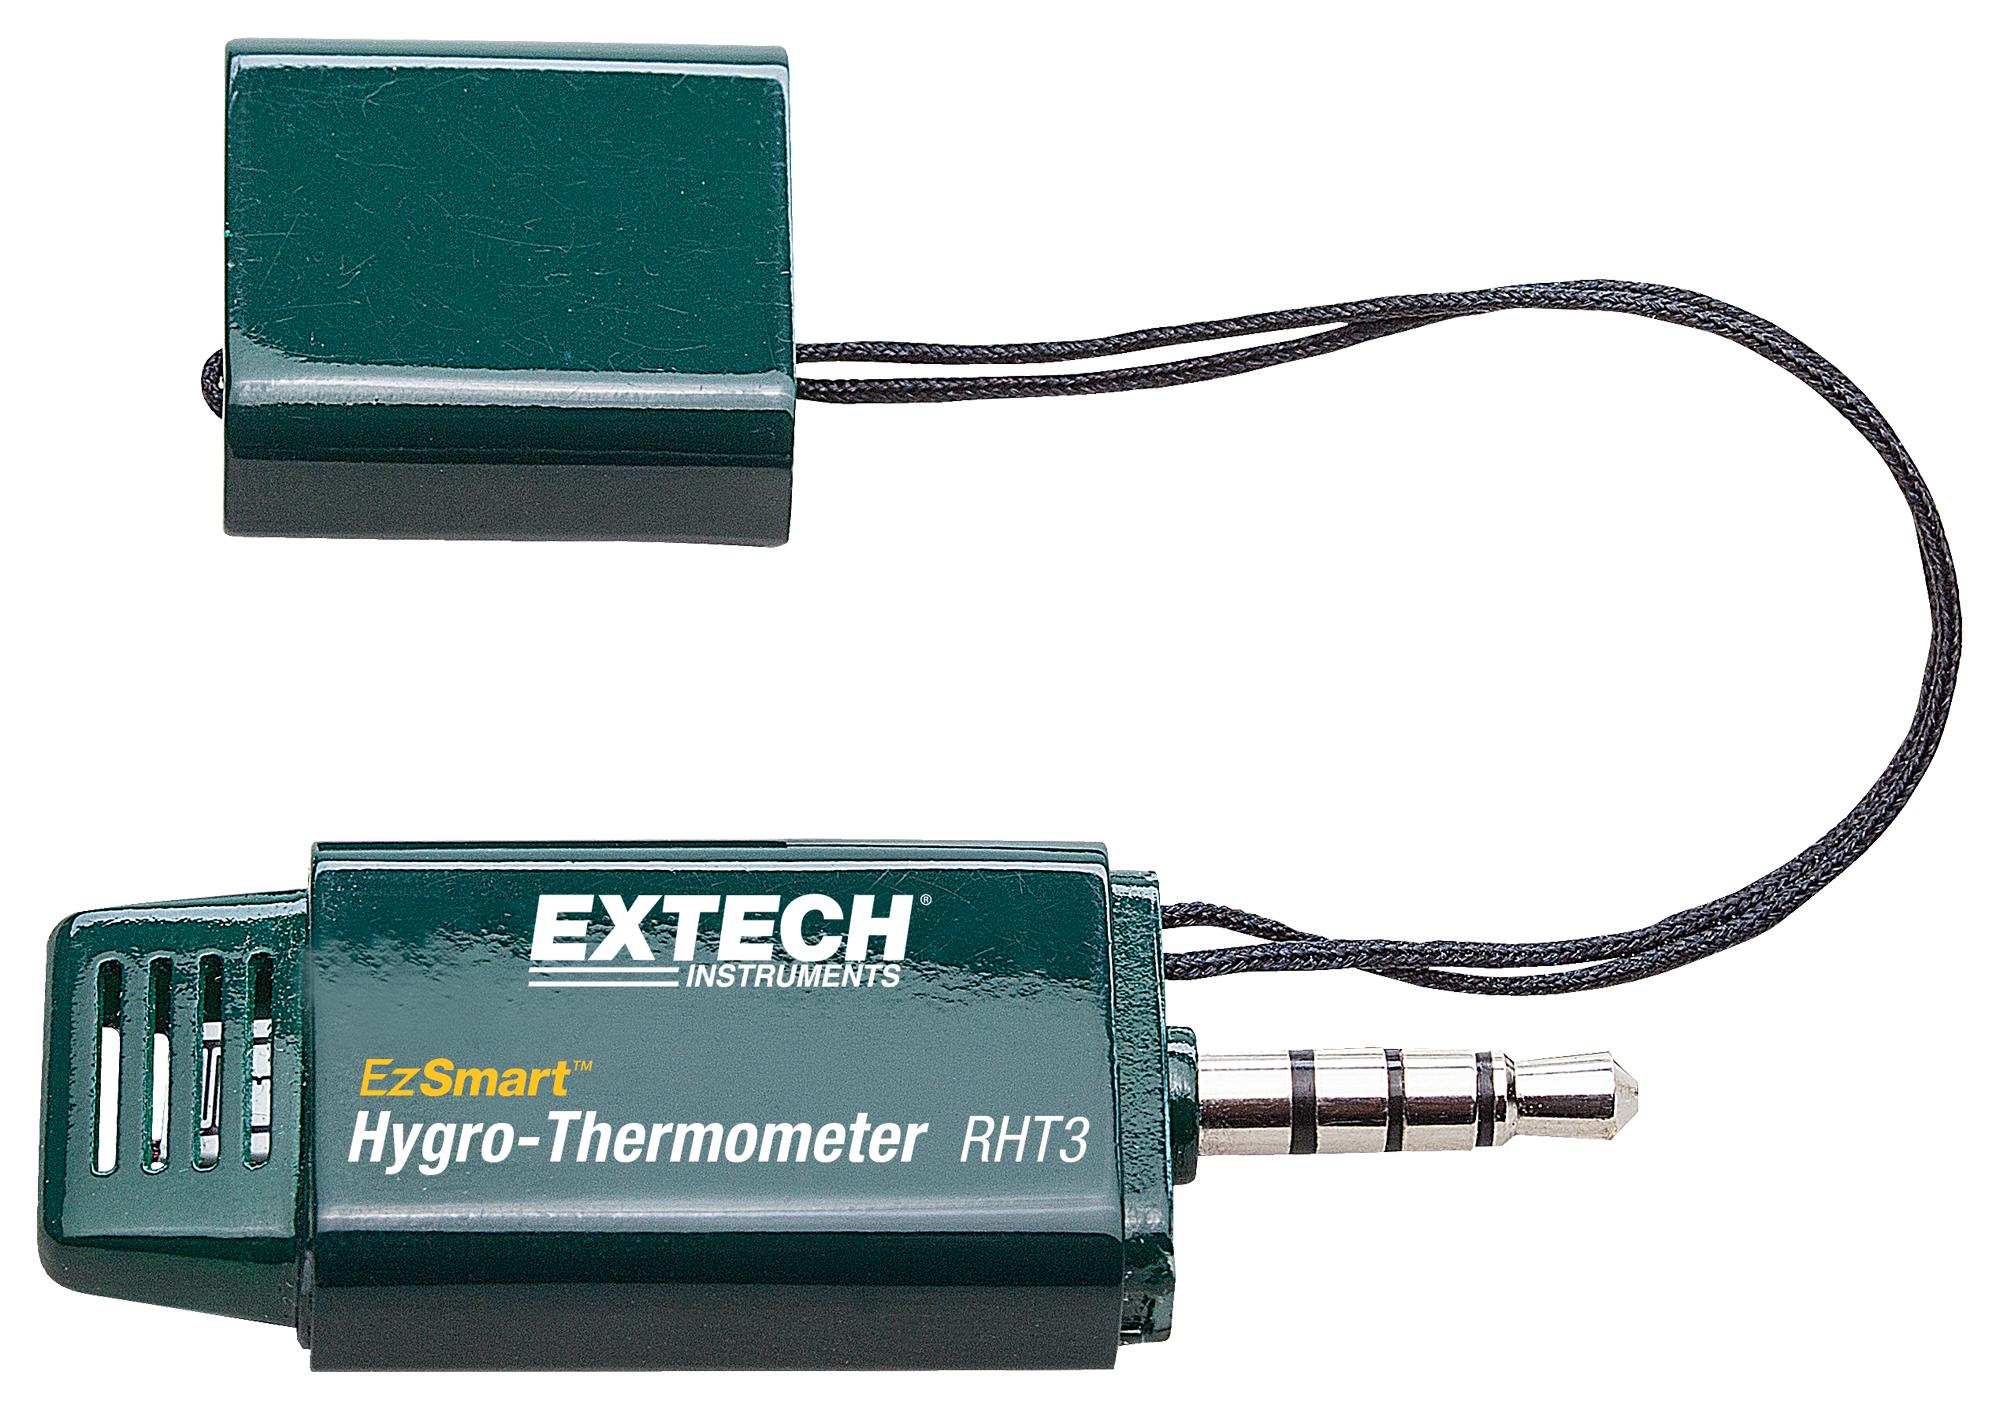 RHT3 HYGRO-THERMOMETER, 20% TO 95% RH, 5% EXTECH INSTRUMENTS